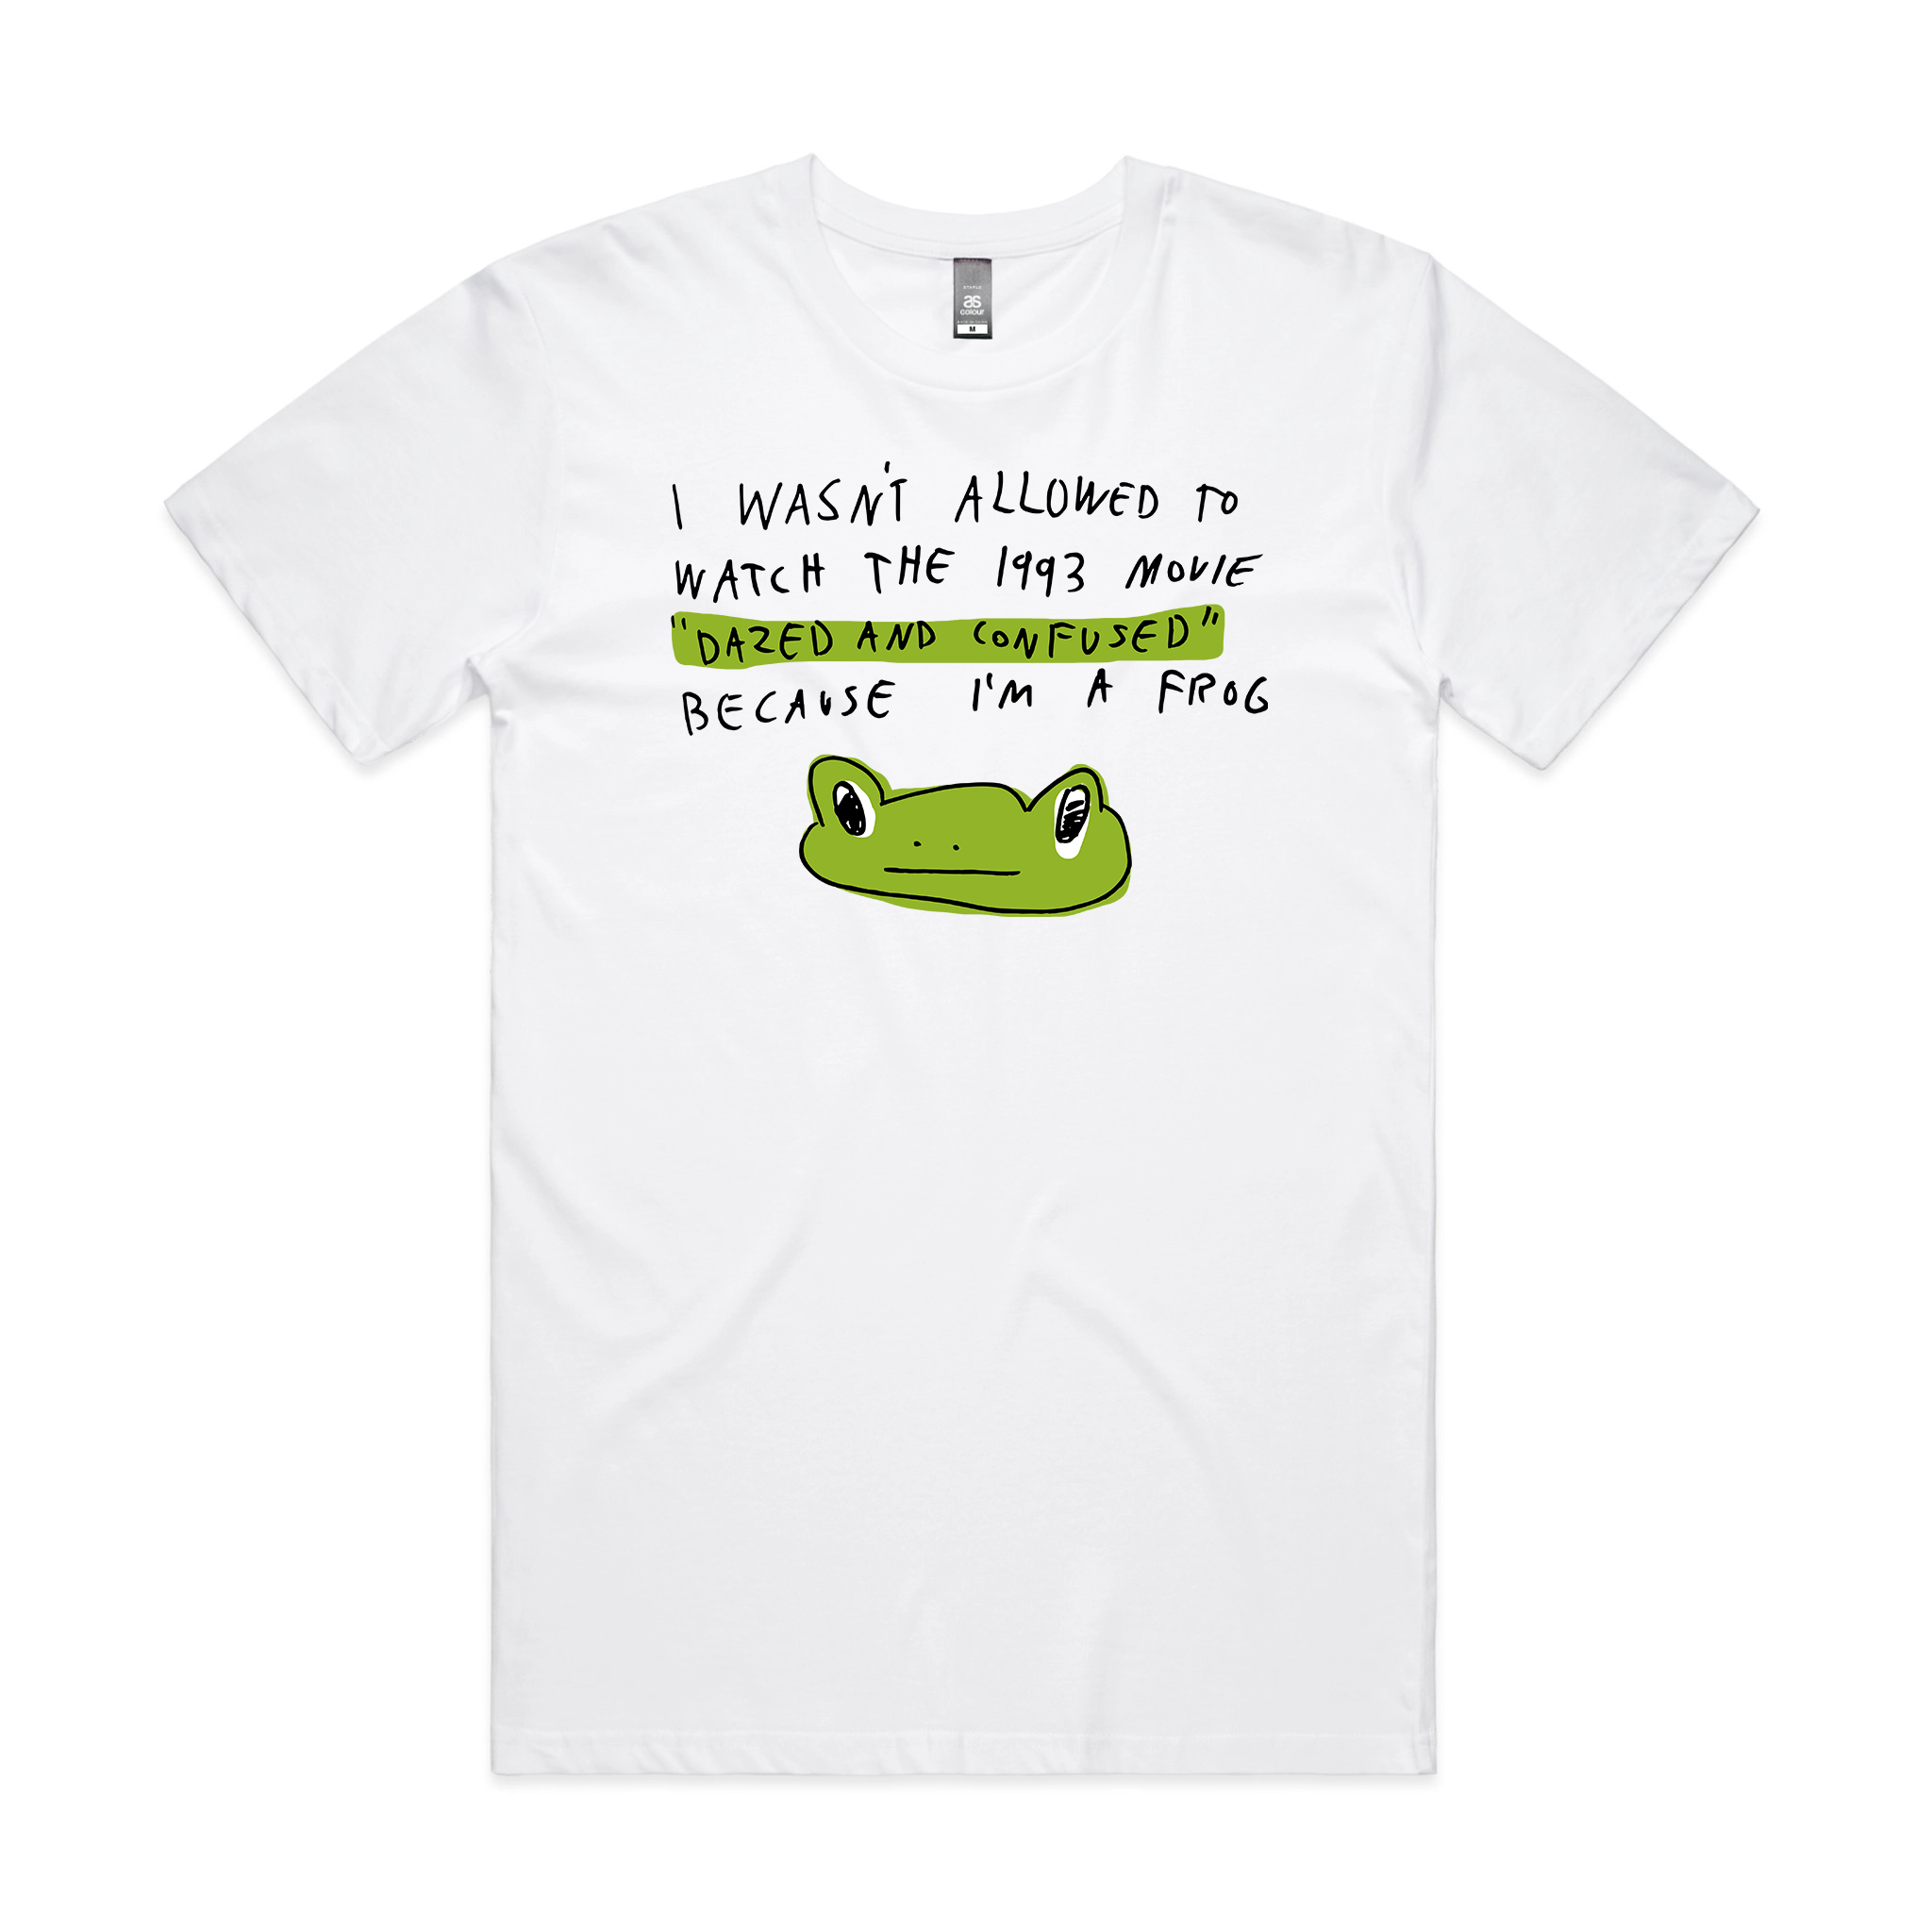 Dazed and Confused Frog Tee